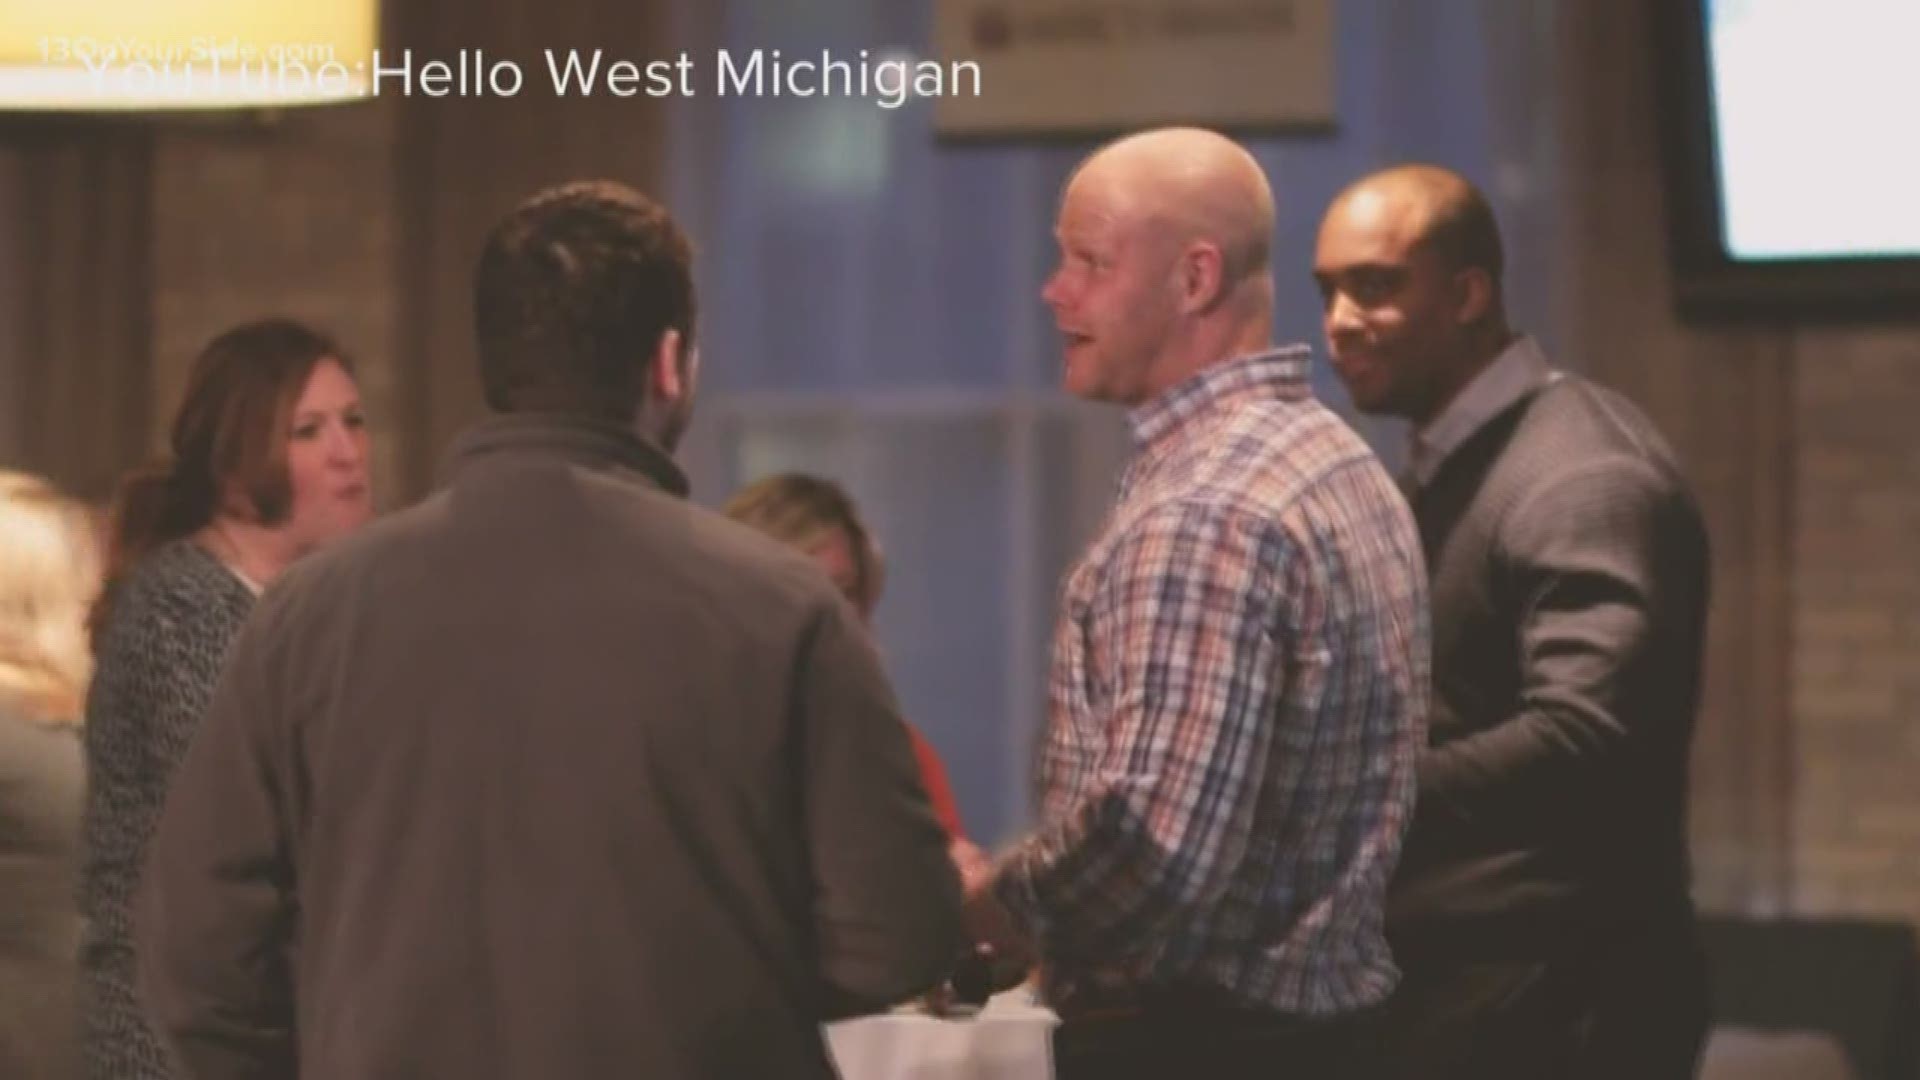 Hello West Michigan offers support to job seekers and their families as they explore possible relocation to West Michigan or after a recent relocation.